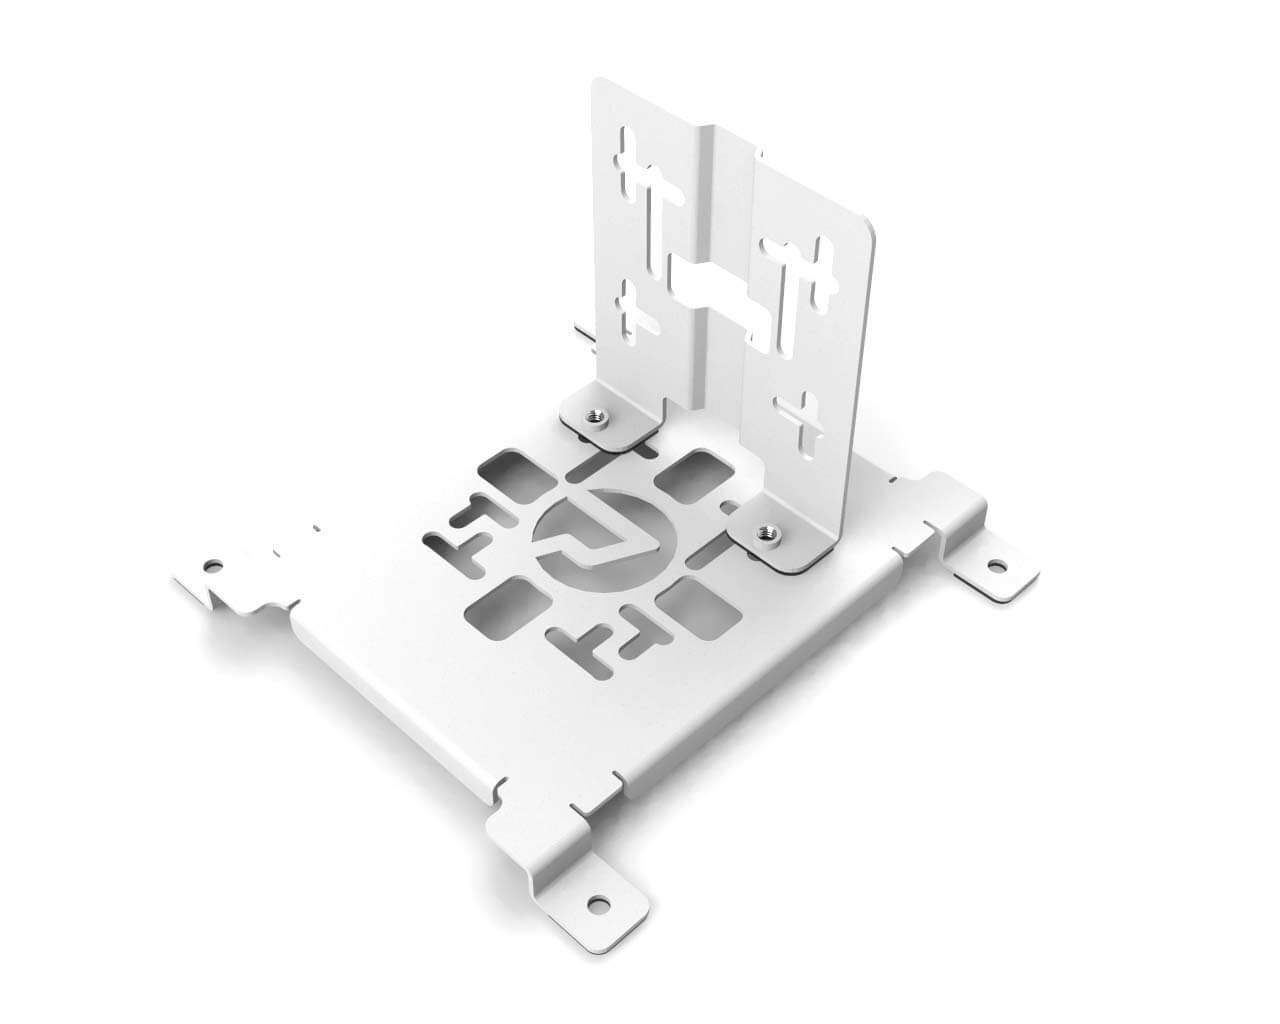 PrimoChill SX Universal Spider Mount Bracket Kit - 140mm Series - PrimoChill - KEEPING IT COOL Sky White